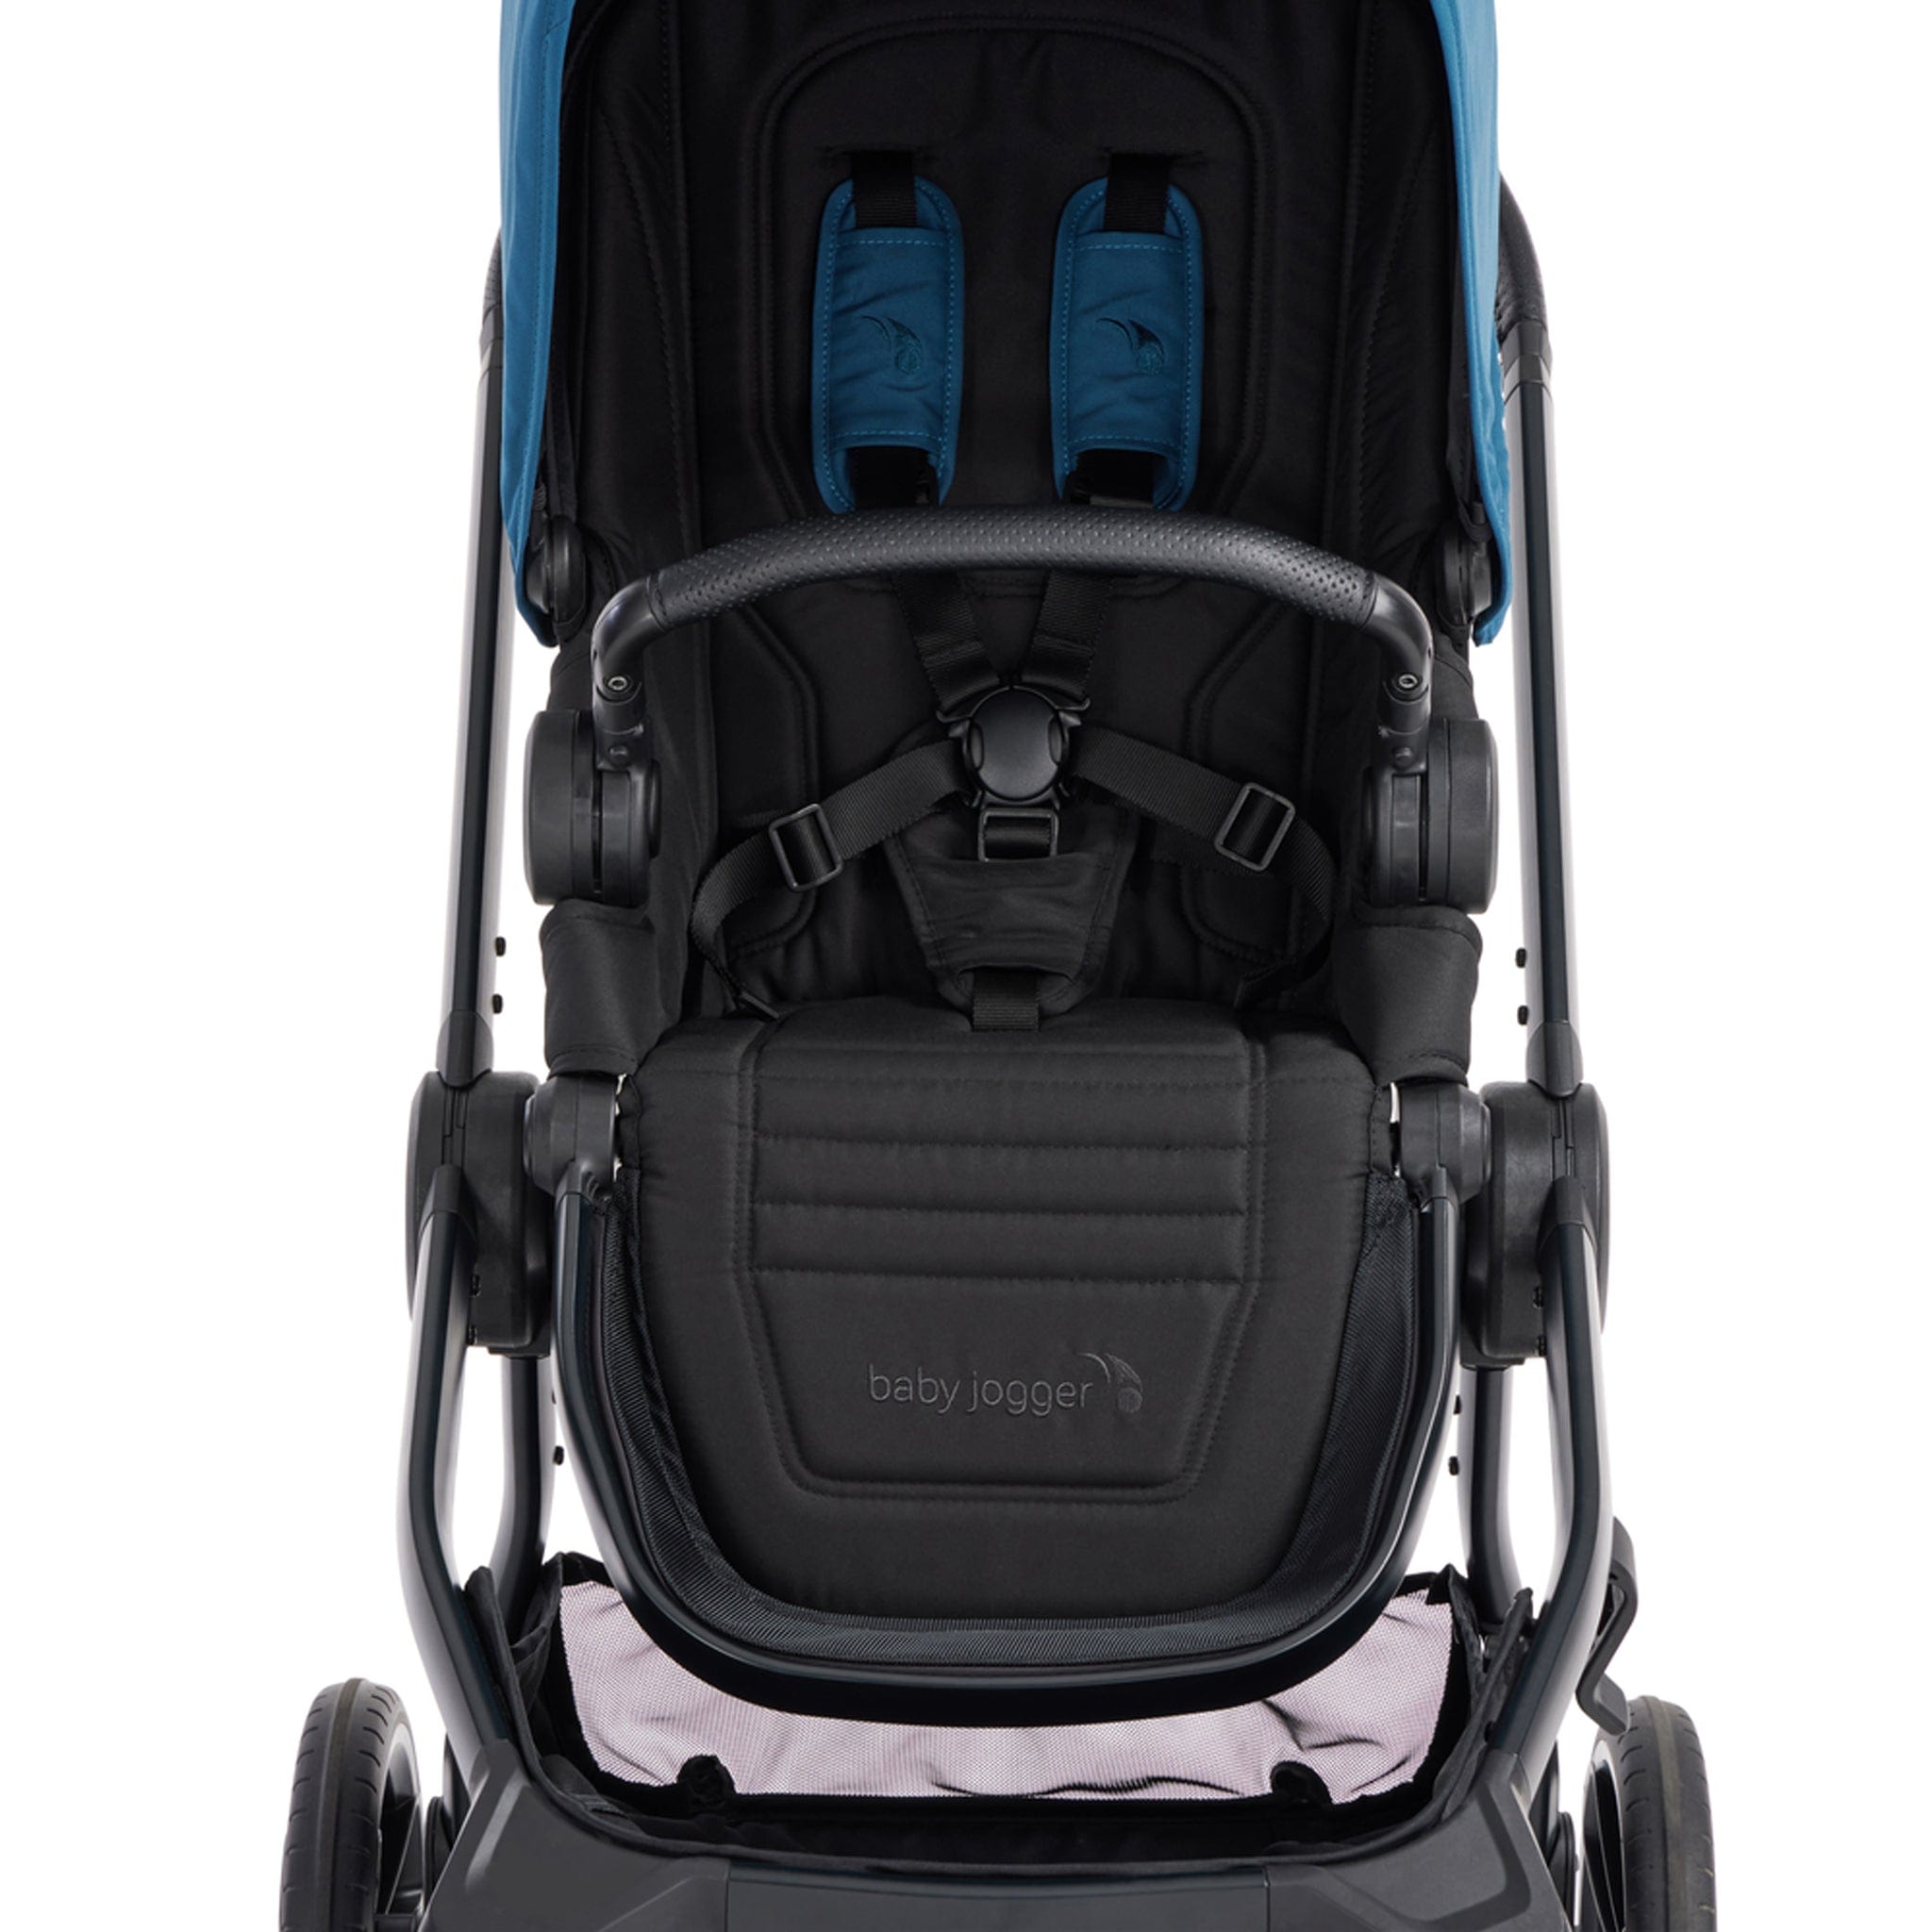 Baby Jogger baby pushchairs Baby Jogger City Sights Cabriofix i-Size Bundle - Deep Teal